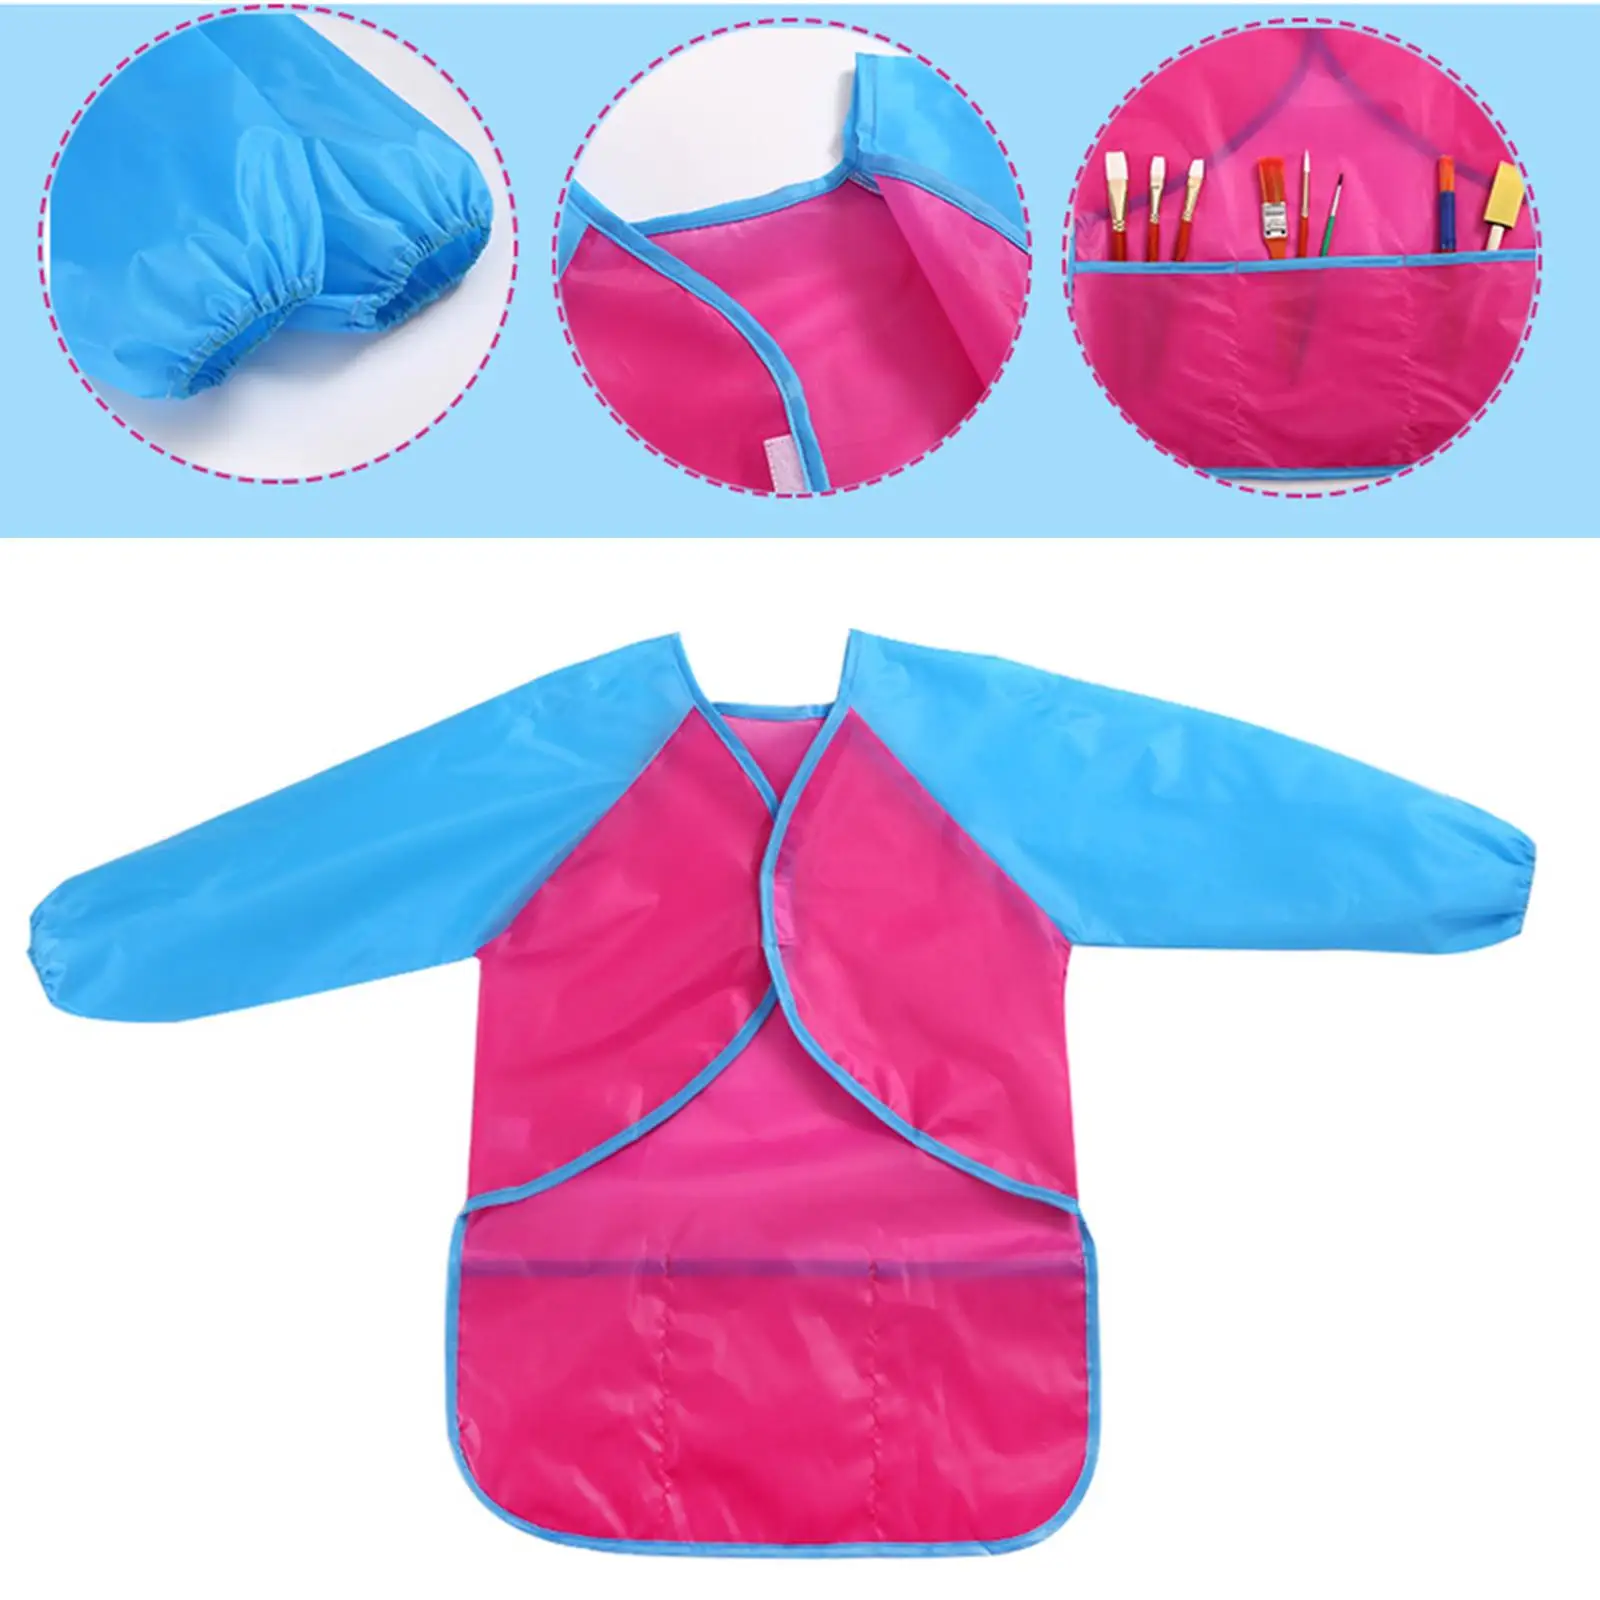 Waterproof Kid Smock, Children`s Painting Aprons with Long Sleeve and 3 Pockets for Painting, Feeding